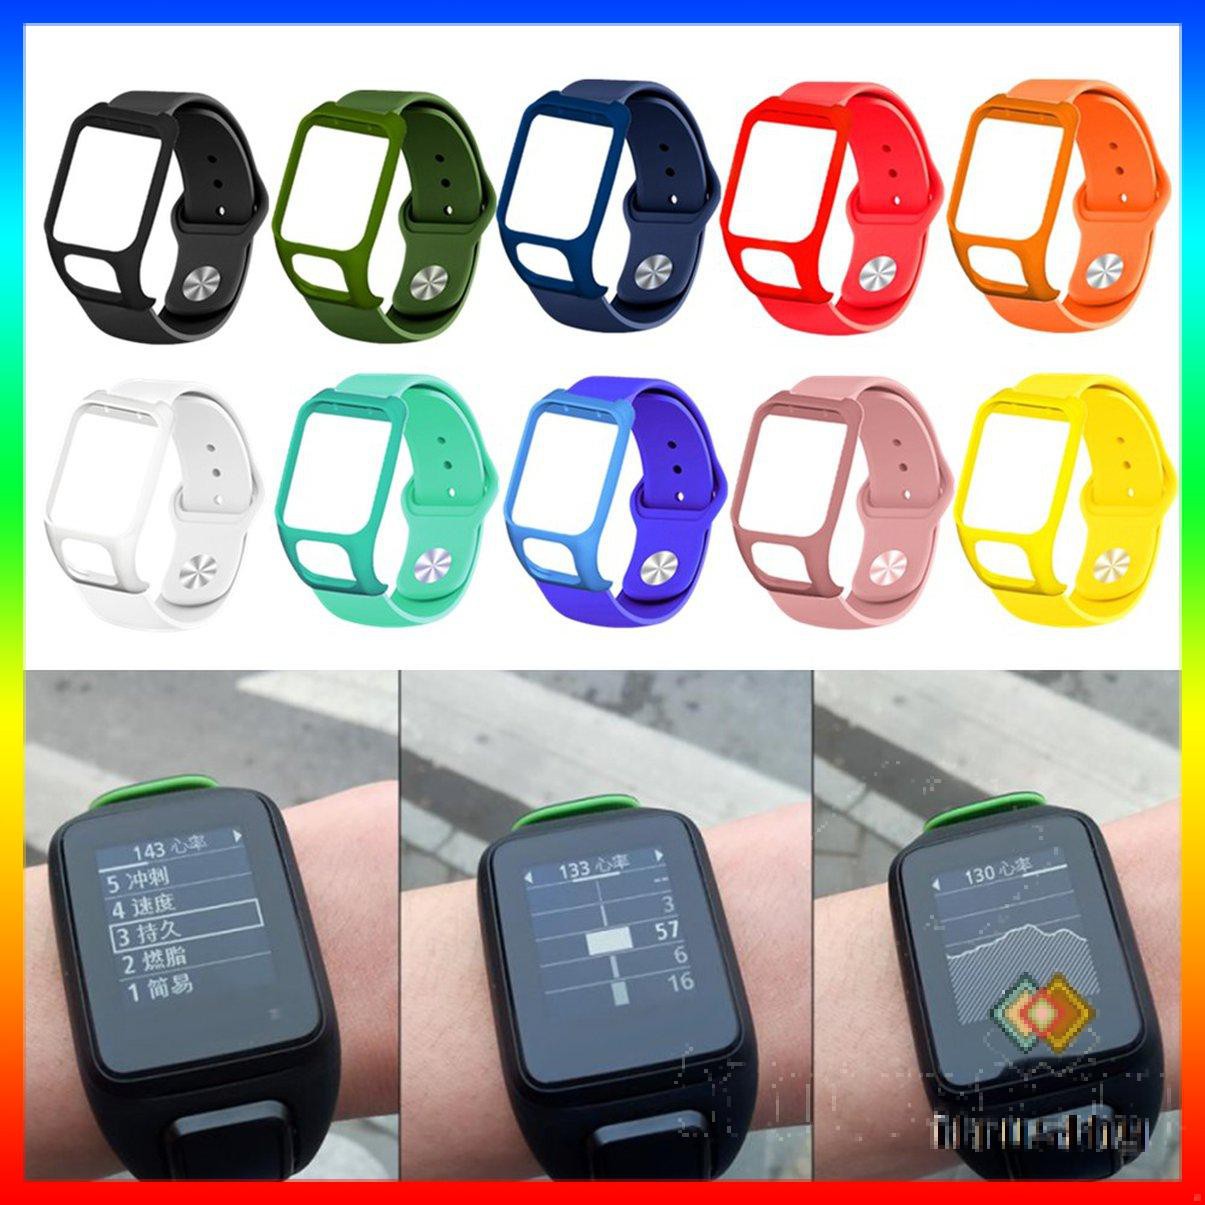 1 Dây Đeo Đồng Hồ Bằng Silicone Cho Tomtom Runner3 / 2 And Tomtom Adventurer Watch